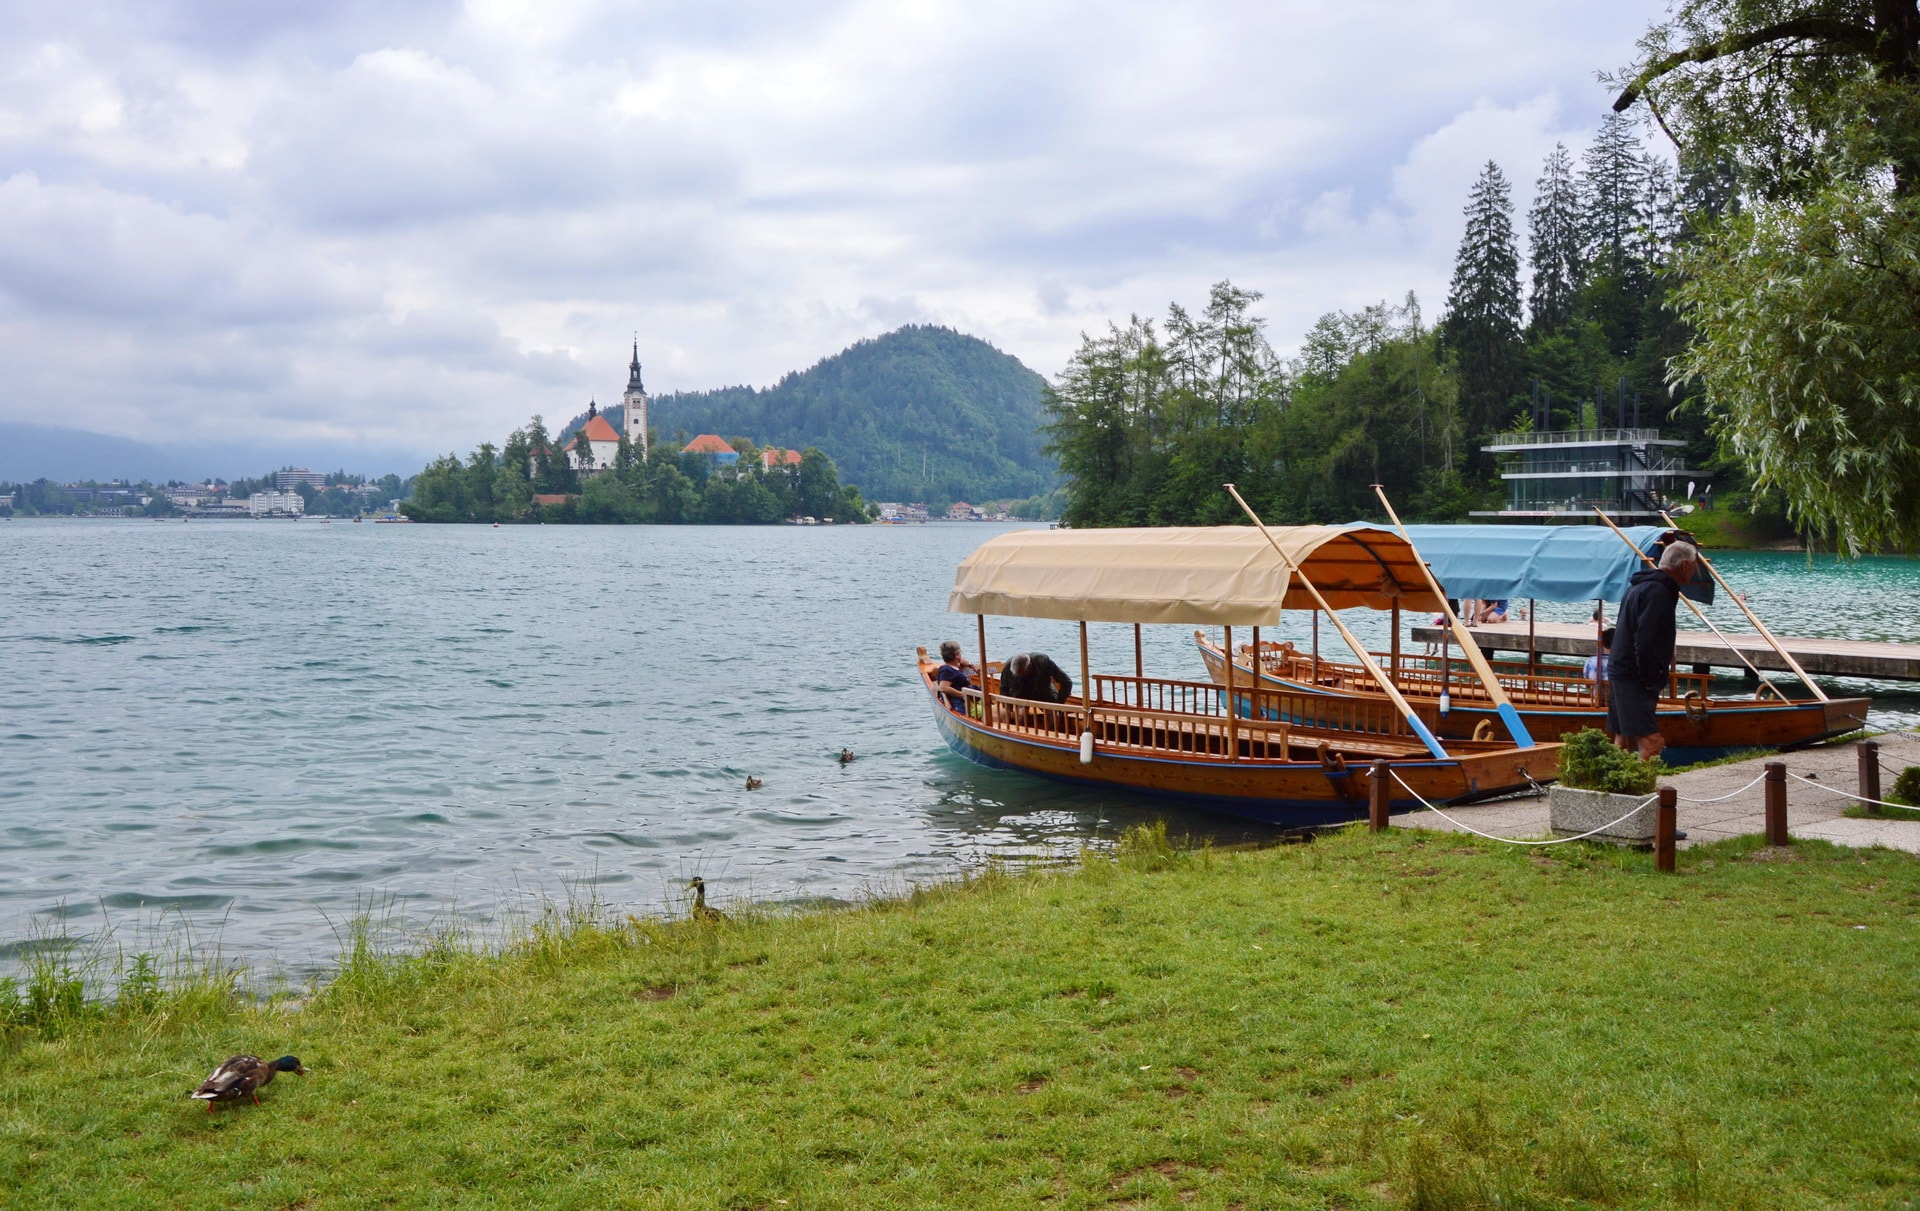 Traditional pletna boats take visitors to the island in the middle of Lake Bled